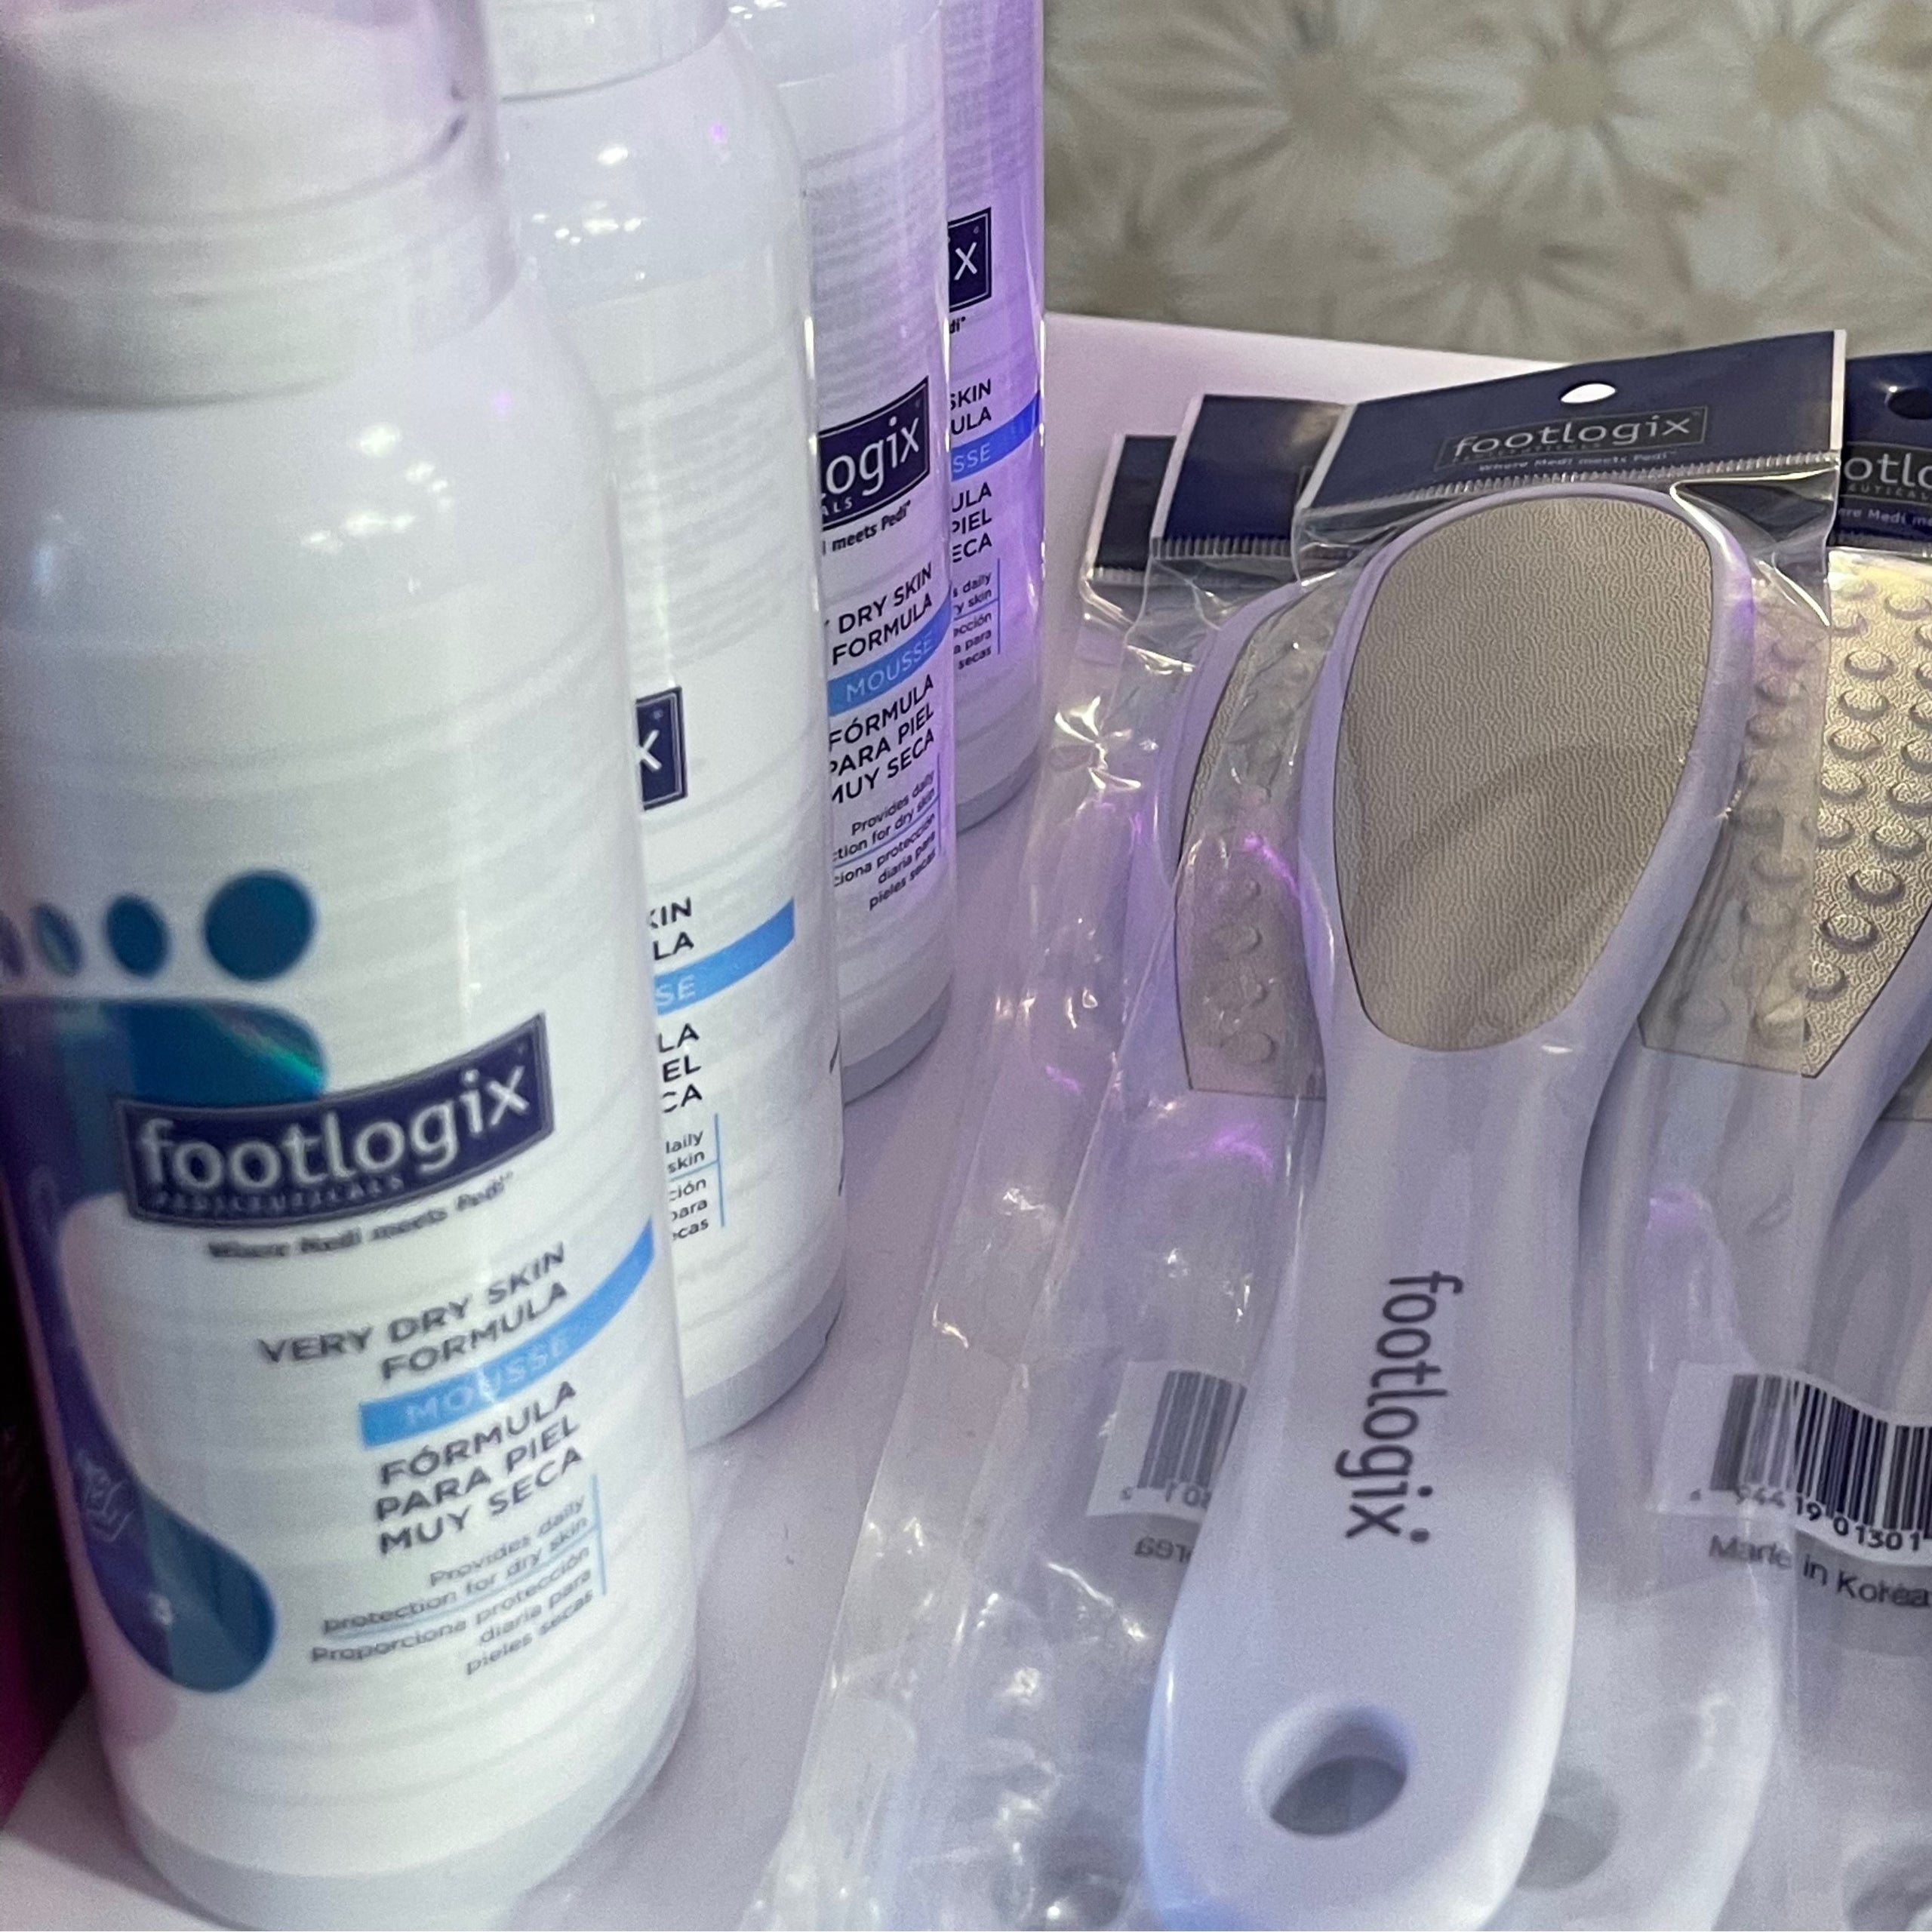 Footlogix foot file + foam (save when you buy together)